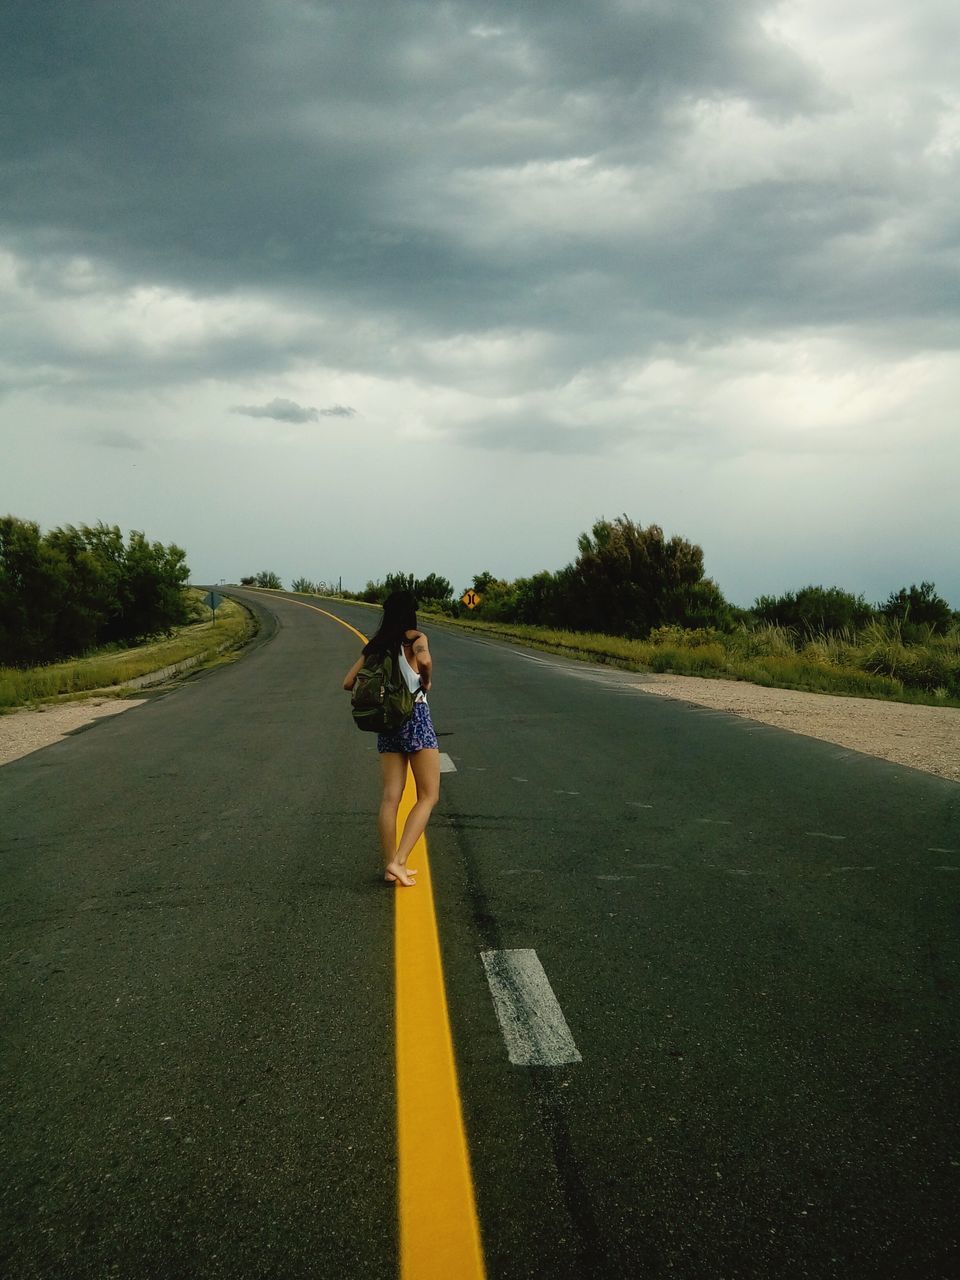 WOMAN WITH UMBRELLA ON ROAD